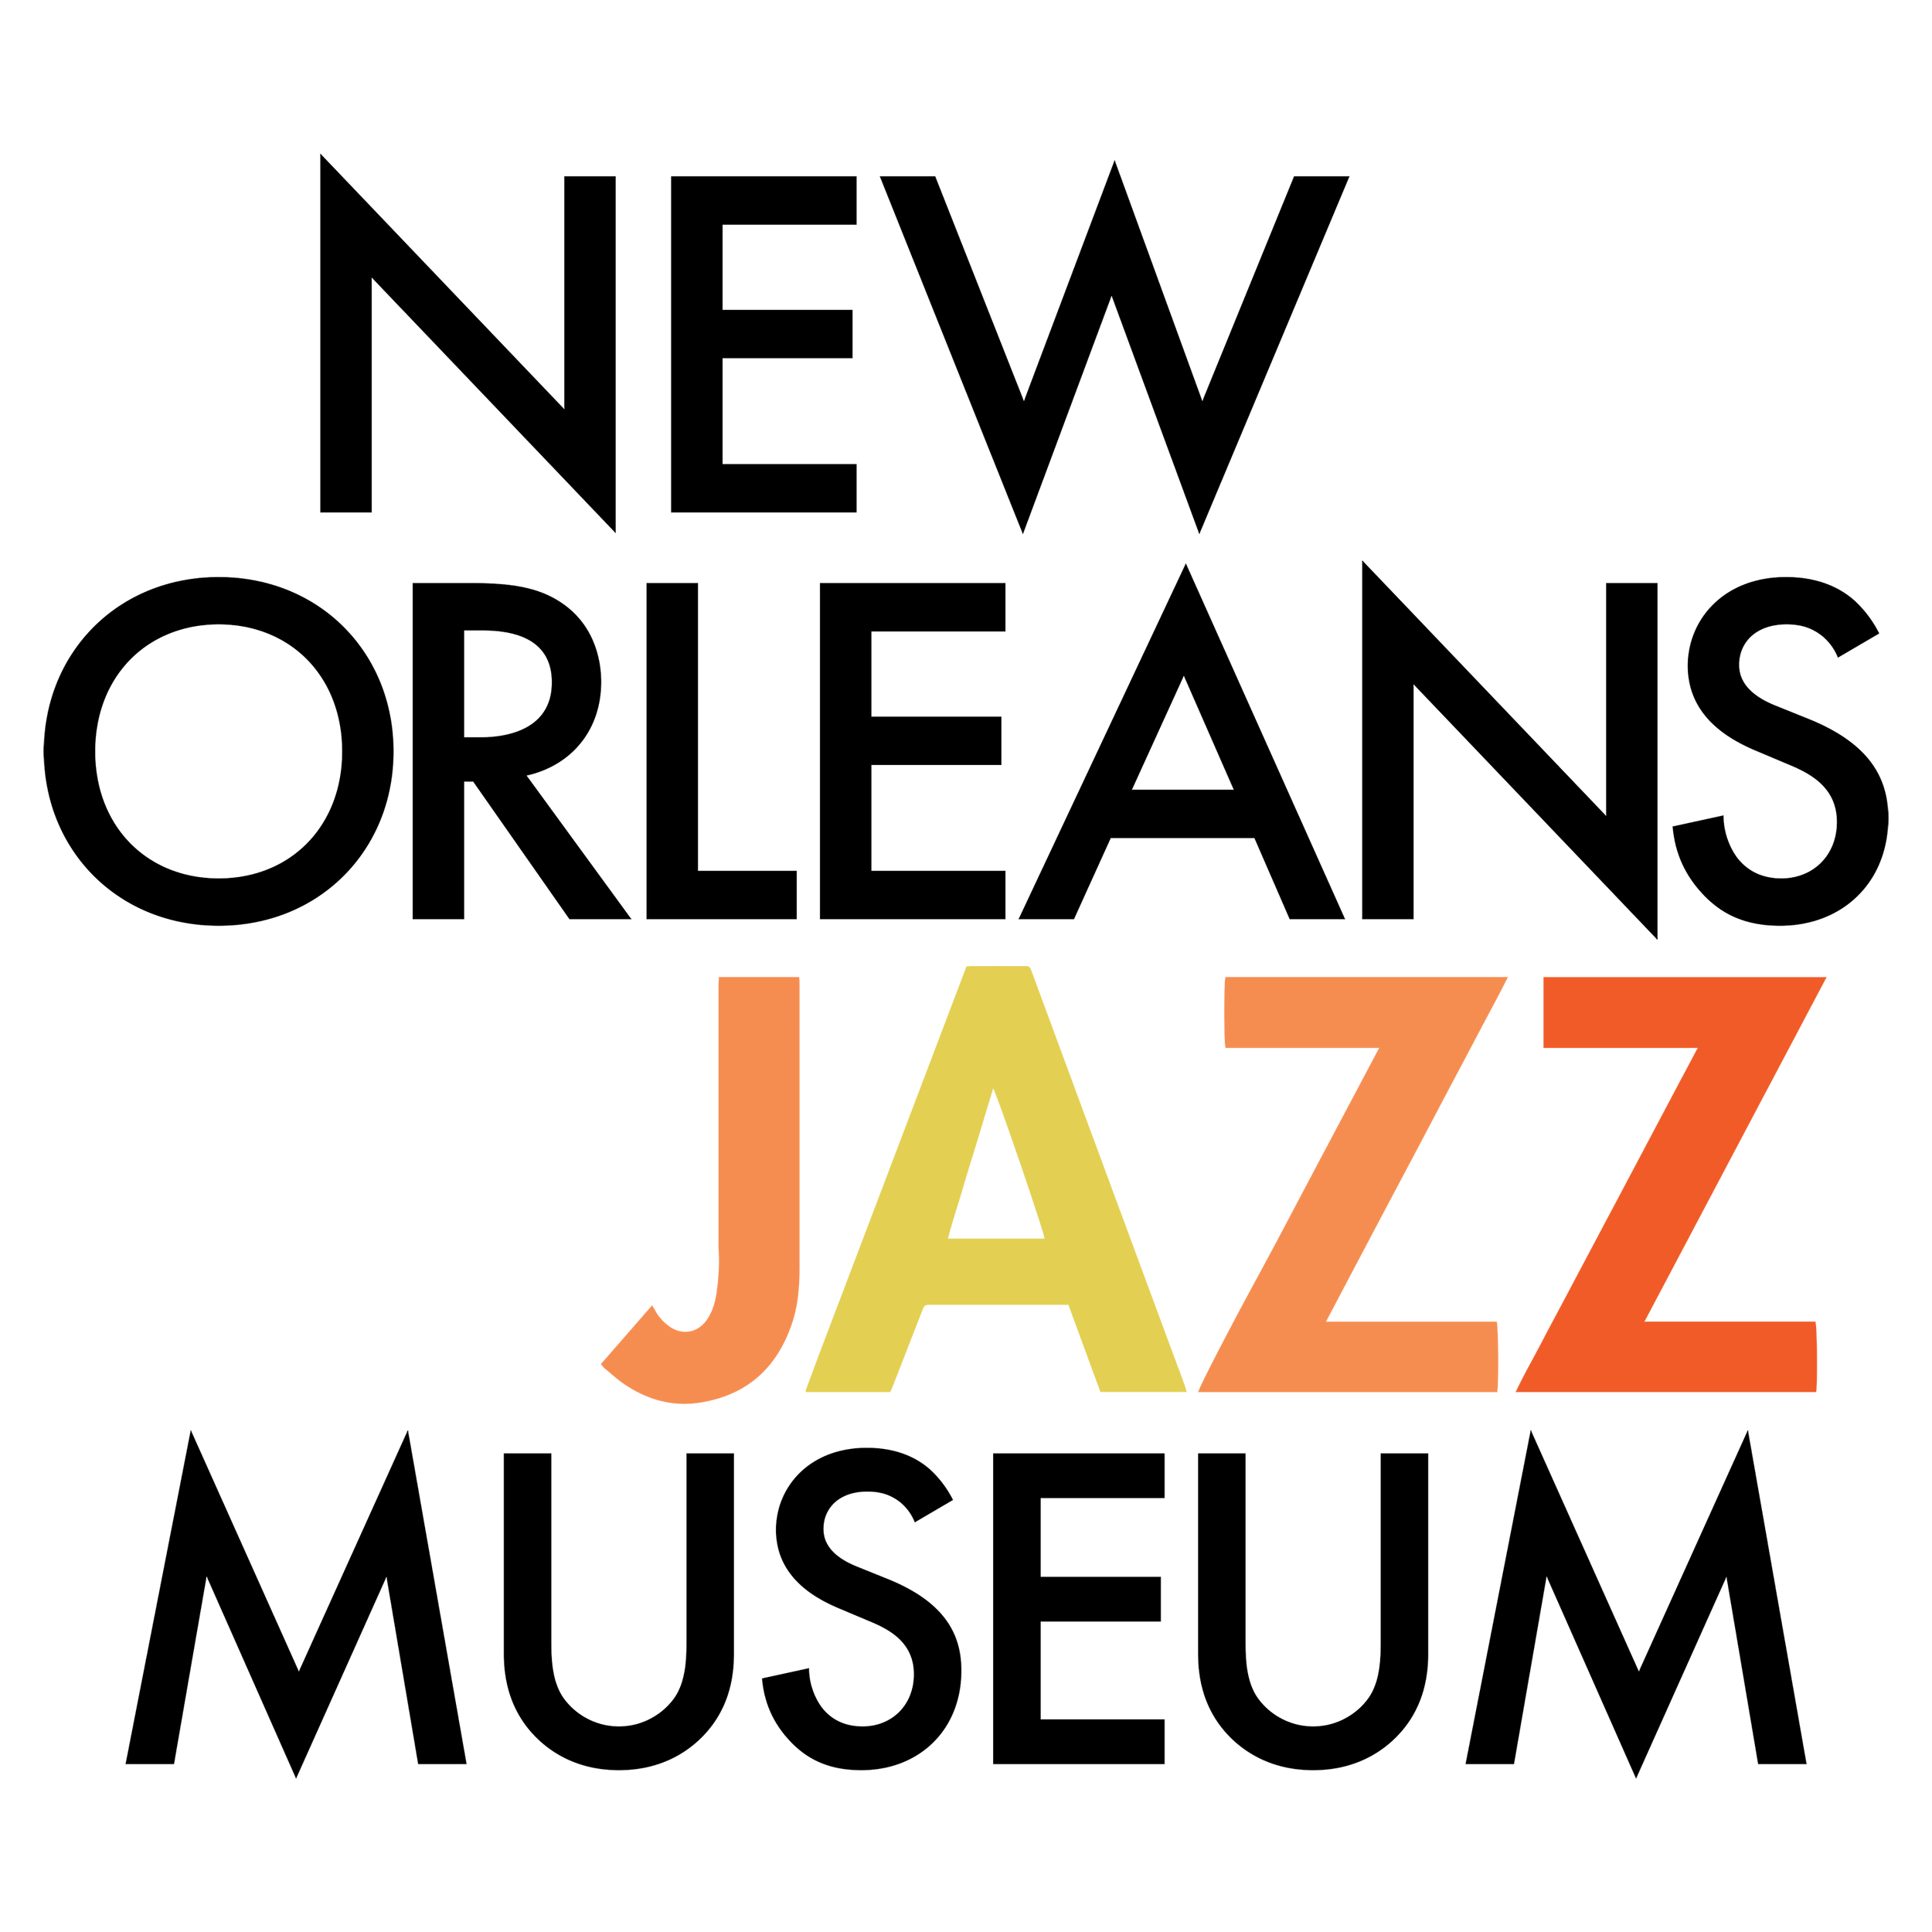 NEW ORLEANS JAZZ MUSEUM 2019 LOGO.png